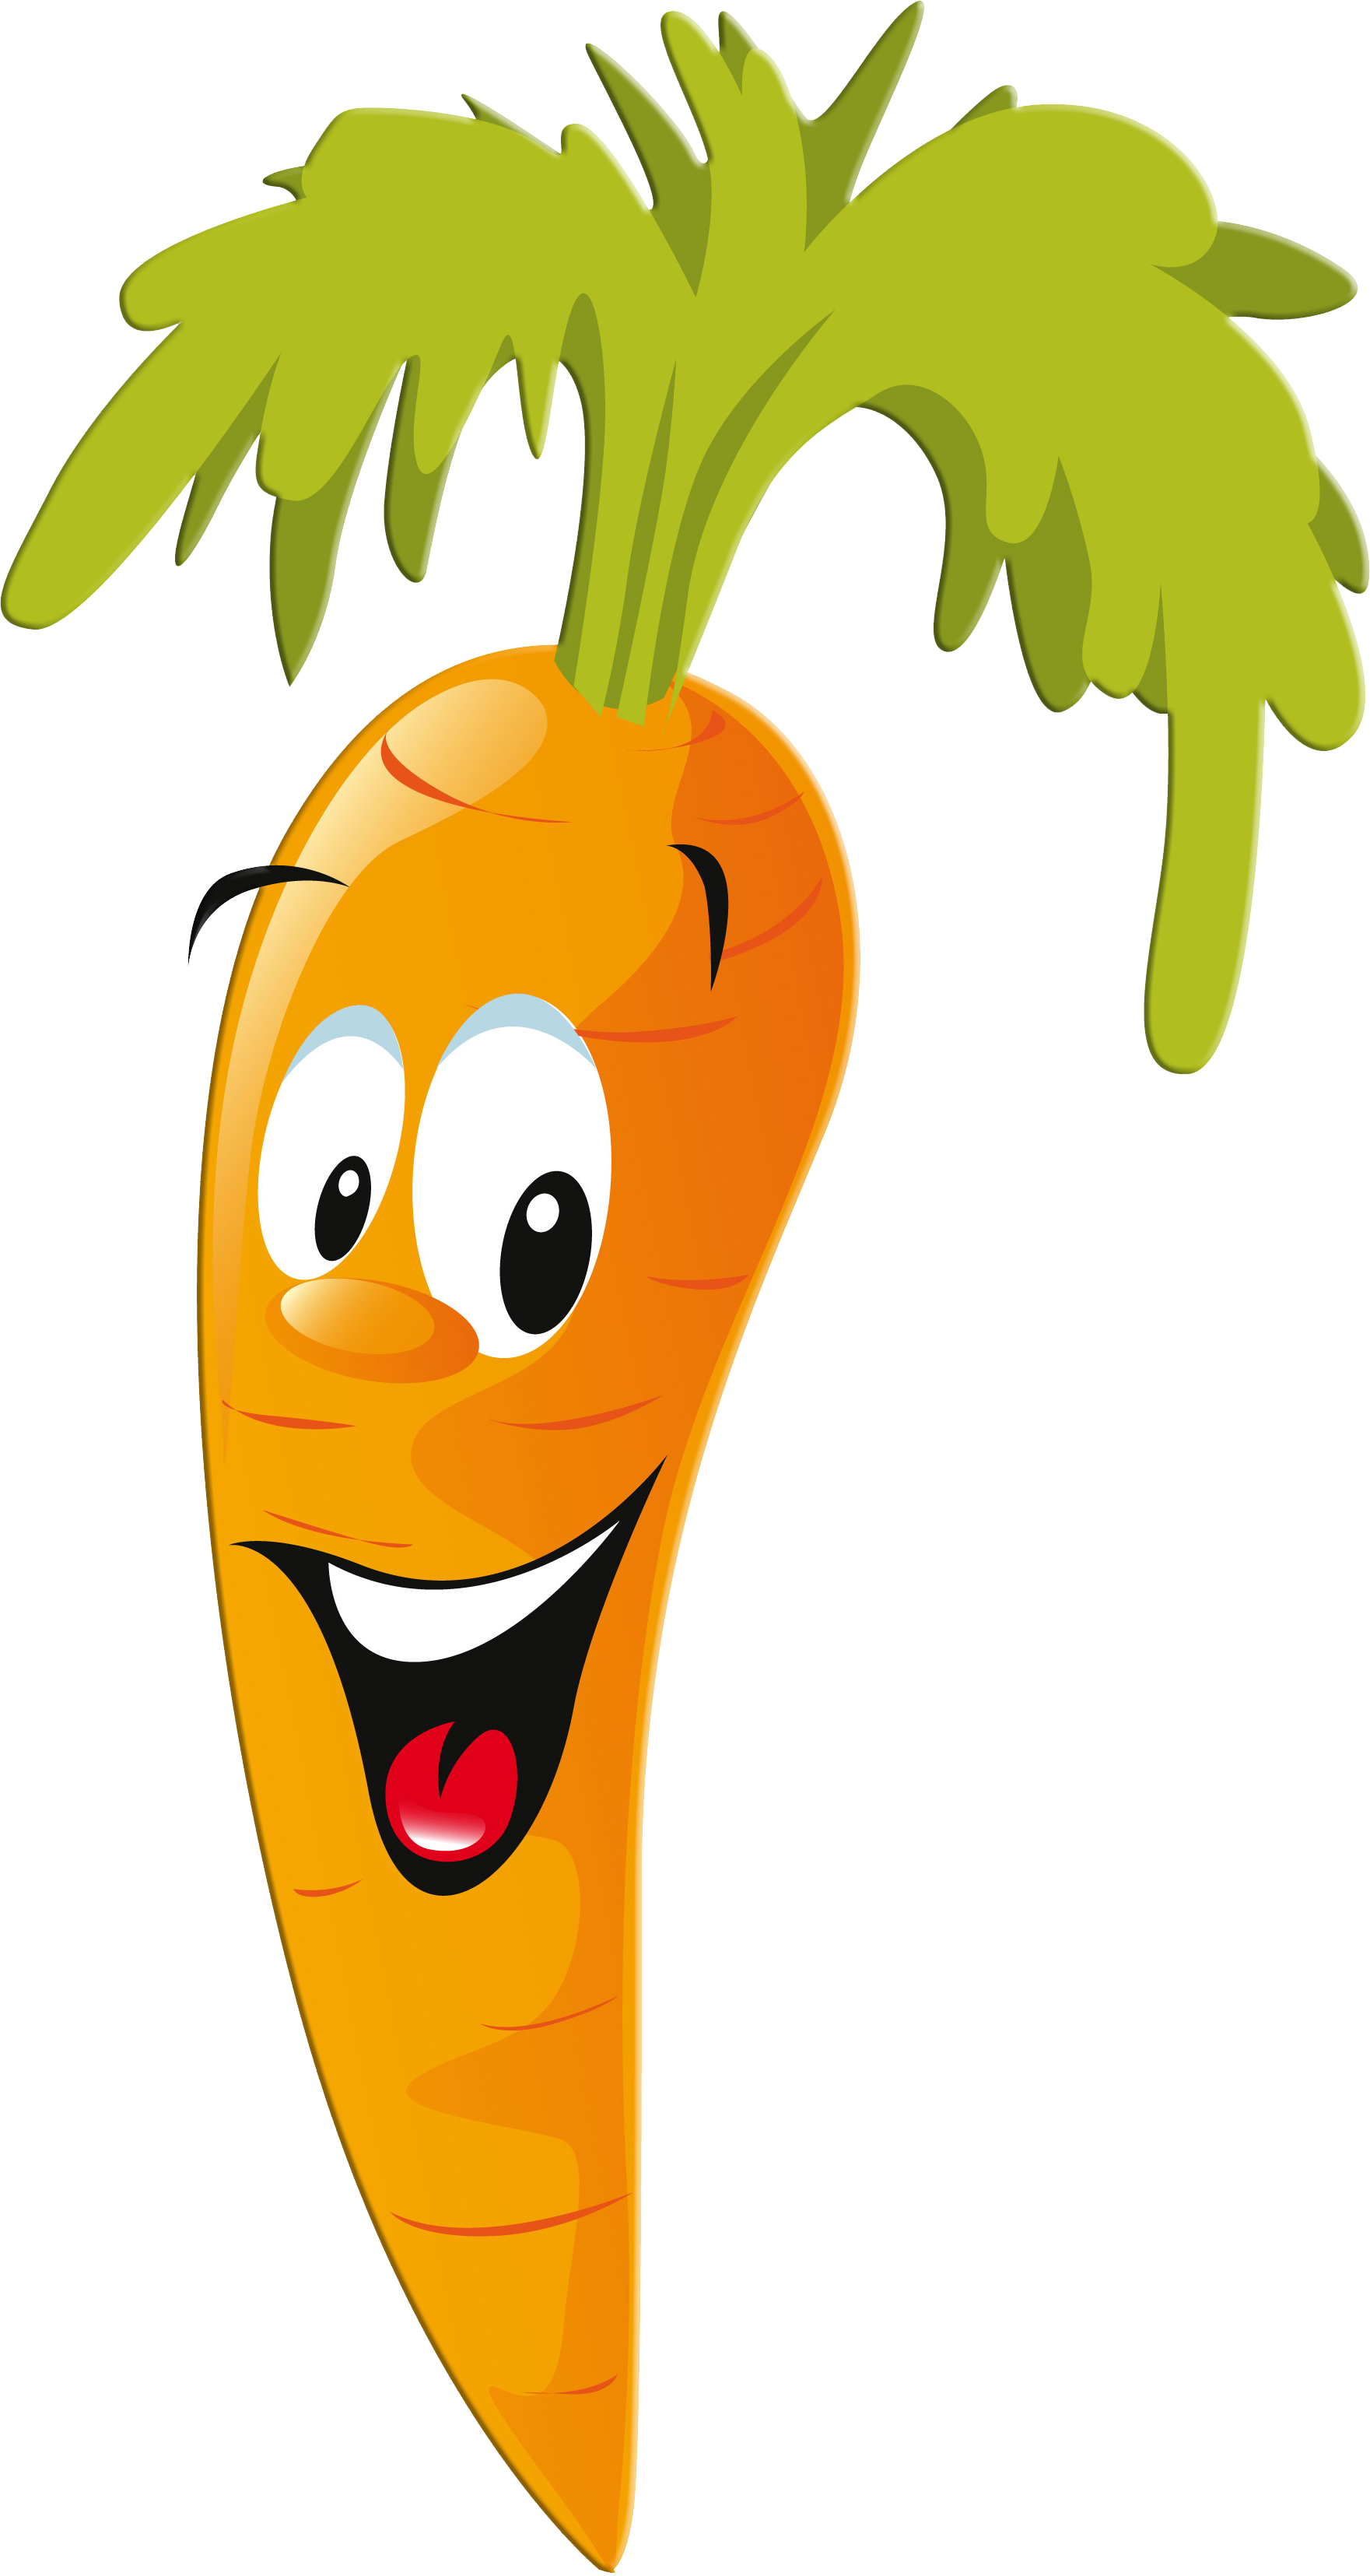 Pin by on art. Clipart kid vegetable